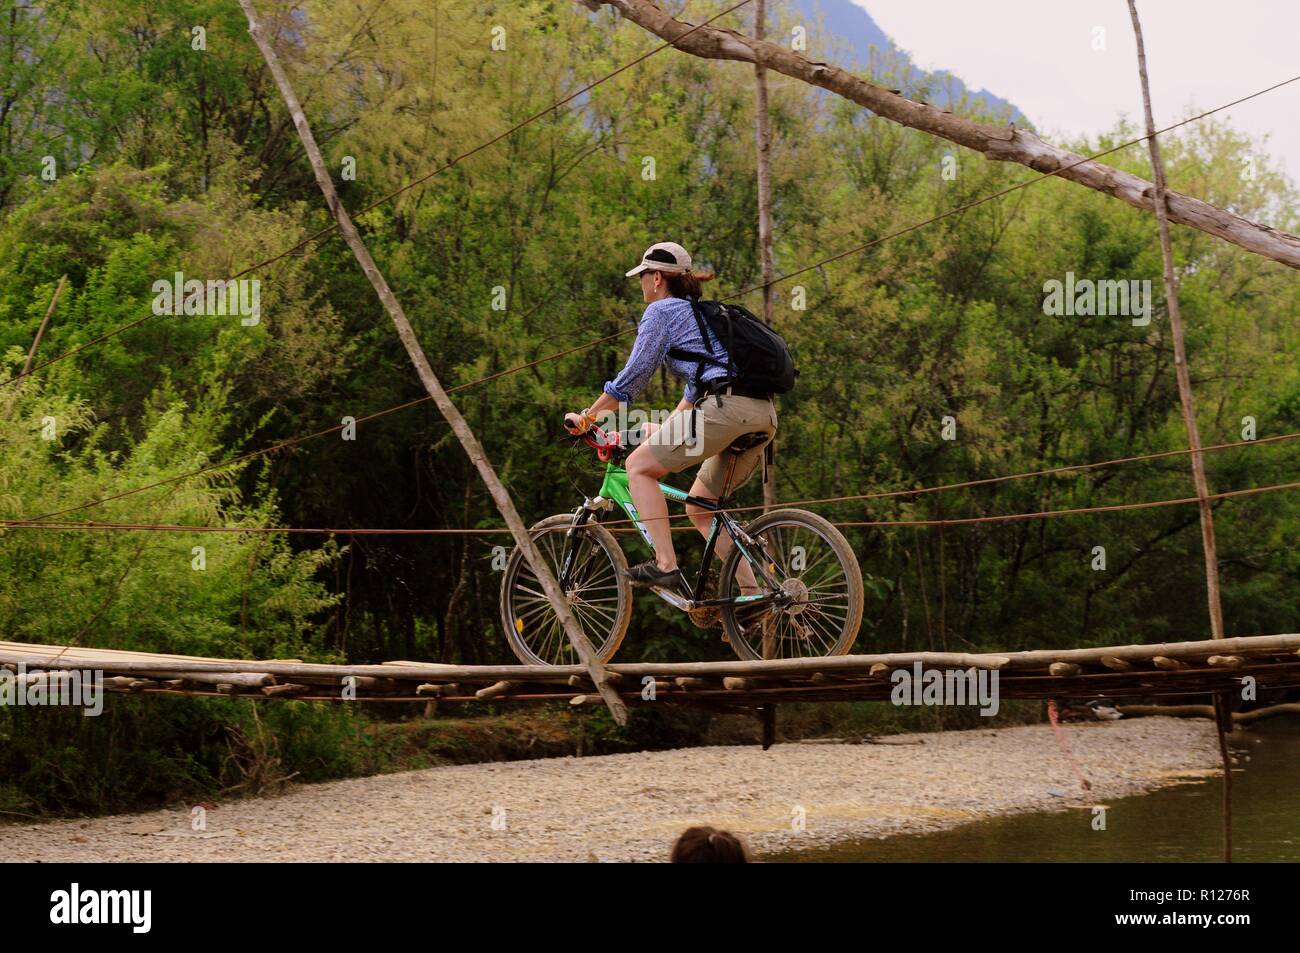 Sporty woman rides a bicycle on a wooden bridge across the river Nom Song, Vang Vieng, Laos. Stock Photo